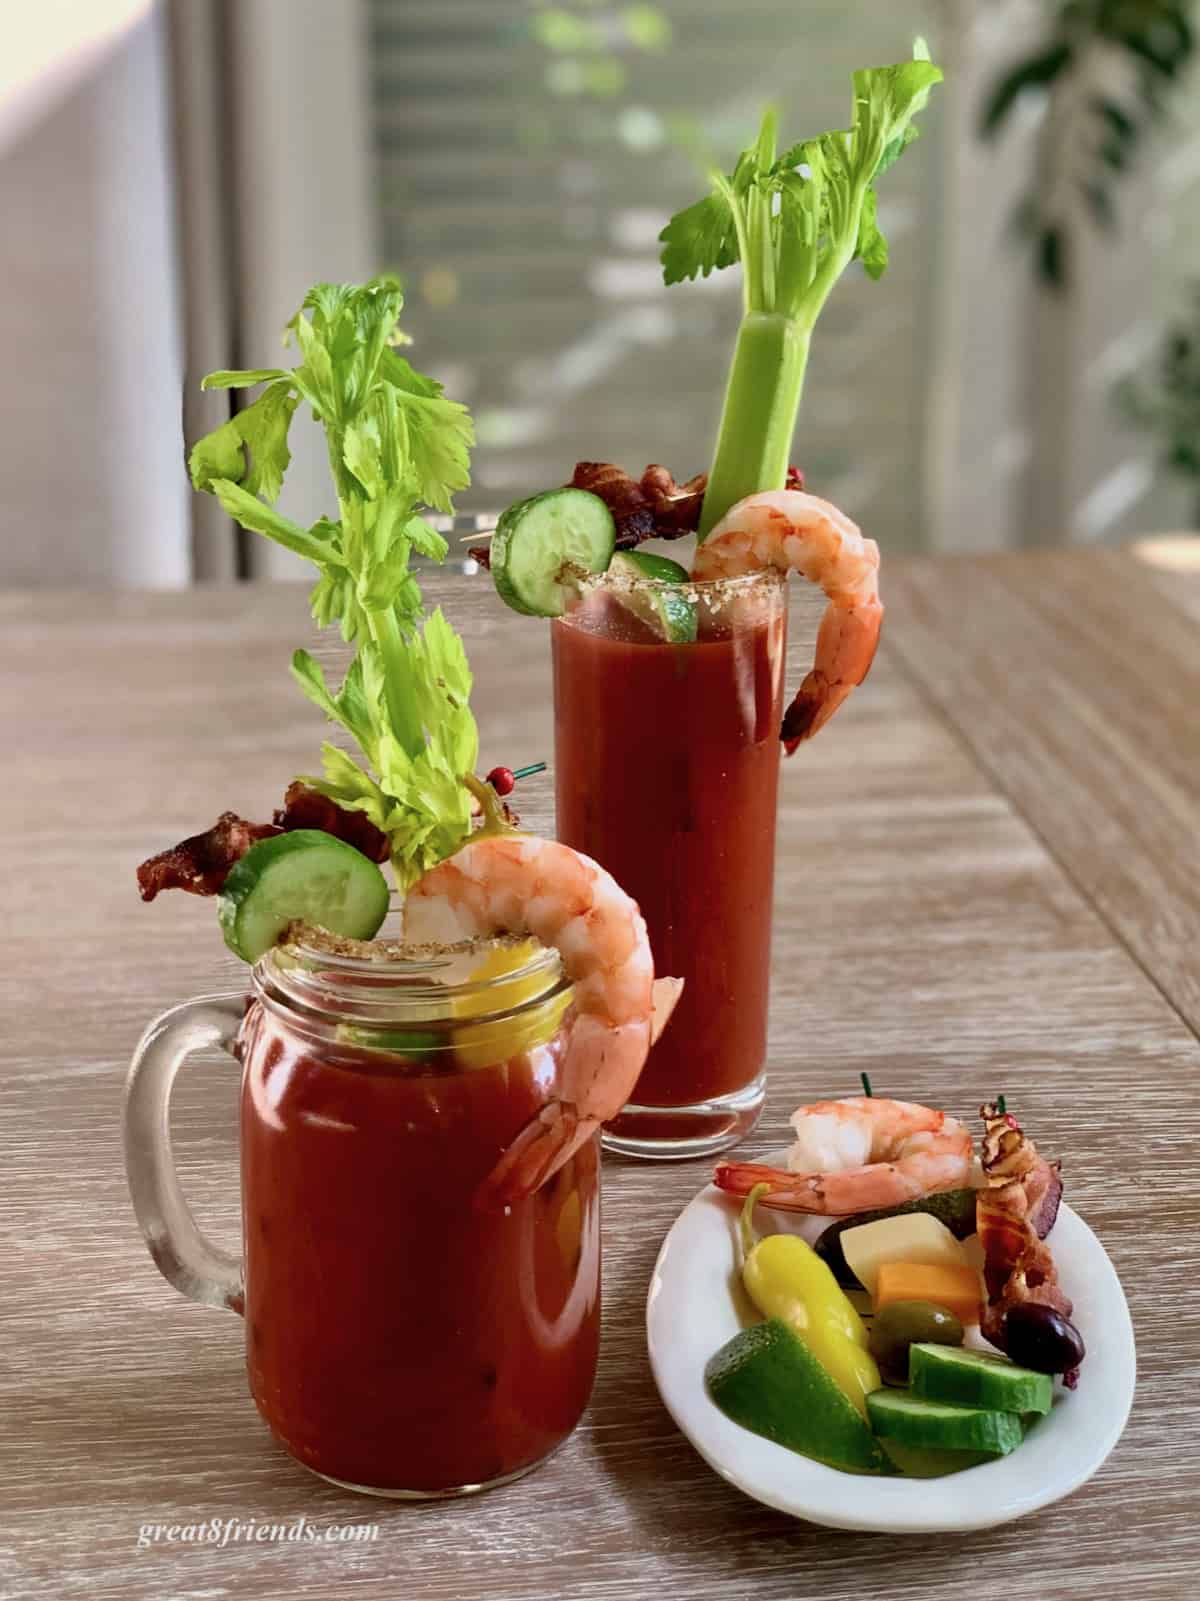 A bloody mary in a glass mug with a shrimp hanging off the side, a slice of cucumber hanging on the side. There's another bloody Mary in the background along with a small plate of extra garnishes.